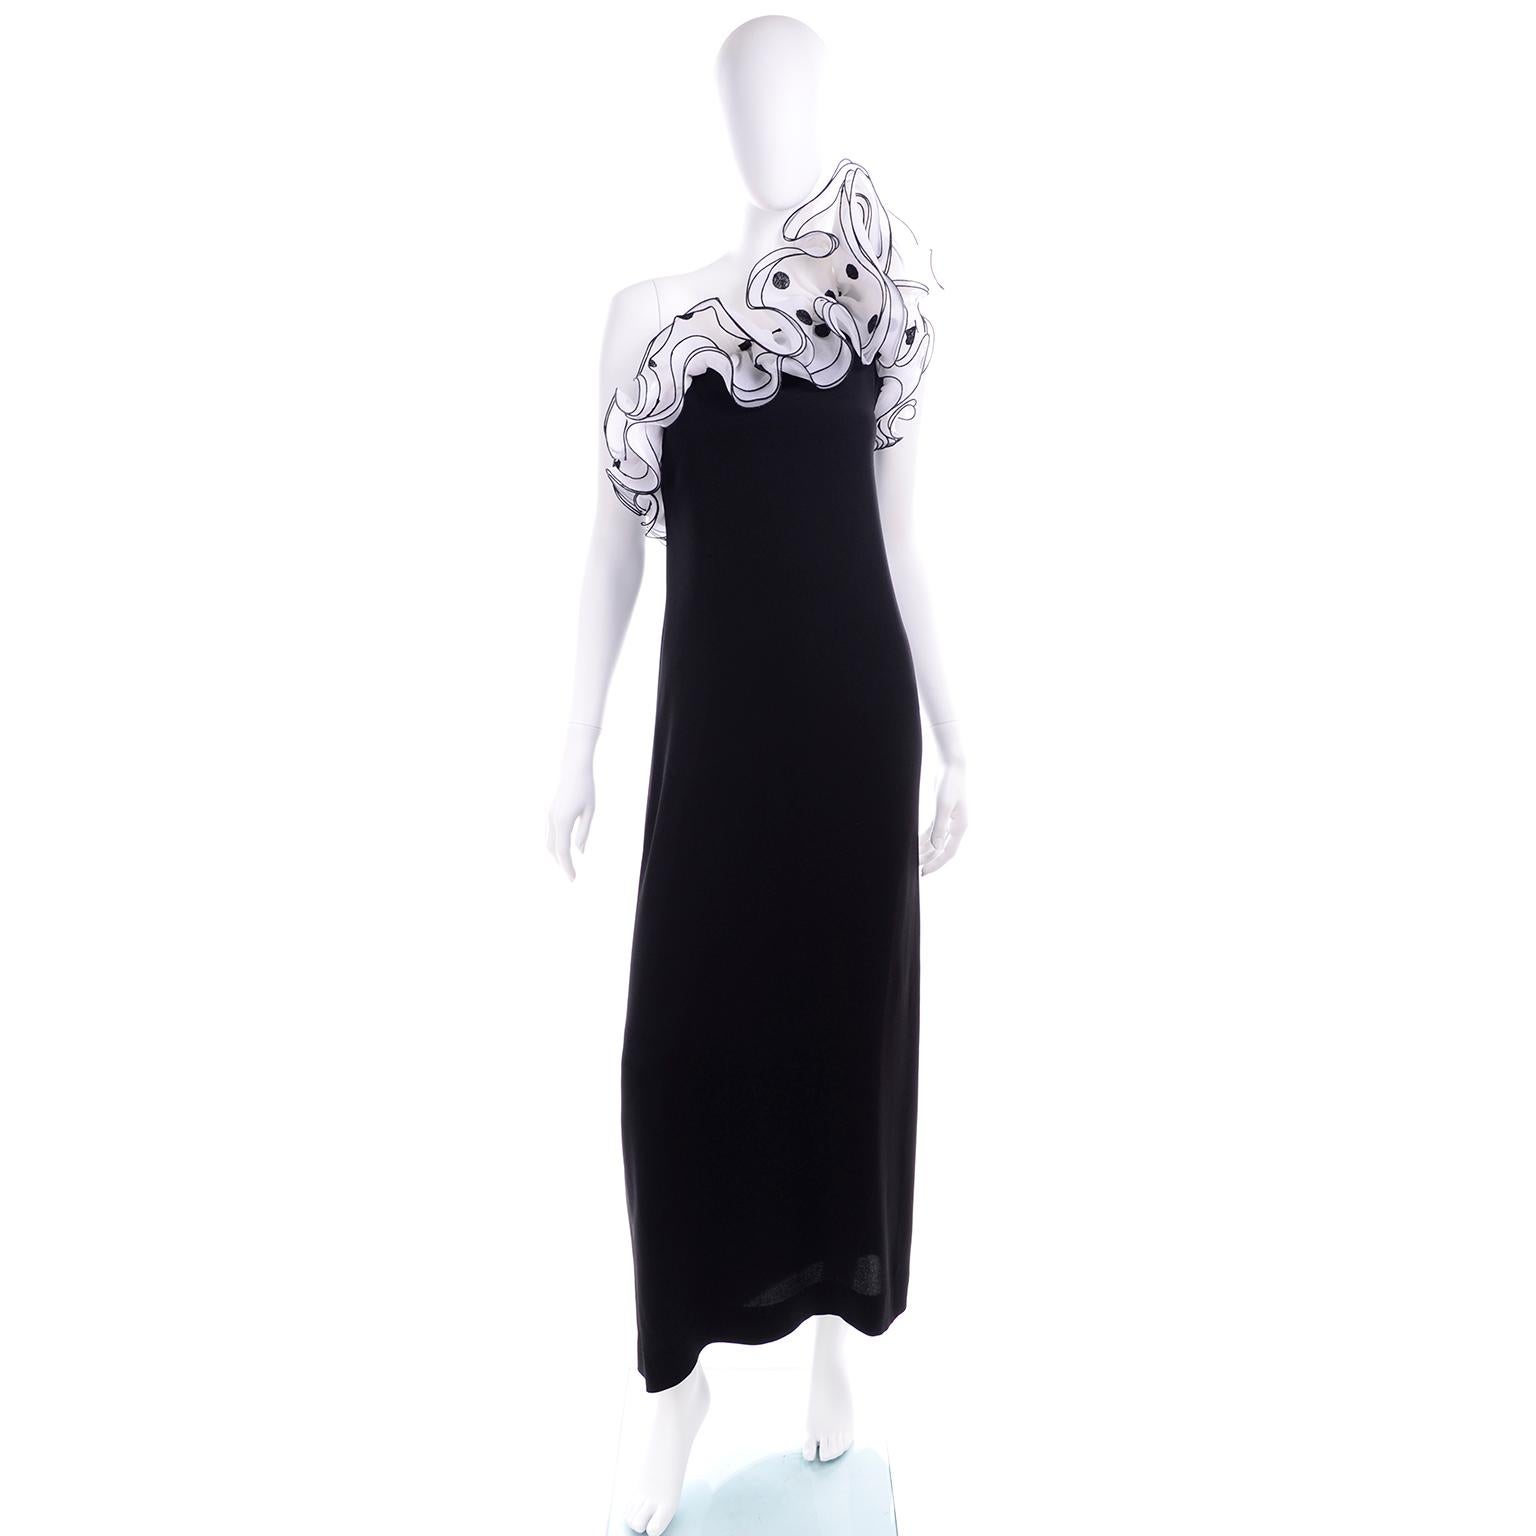 We love Victor Costa dresses! He created some incredible party dresses and we think they fit easily into any modern wardrobe! This long black one shoulder dress has fabulous black and white polka dot organza ruffles and a low back. This 1970's dress